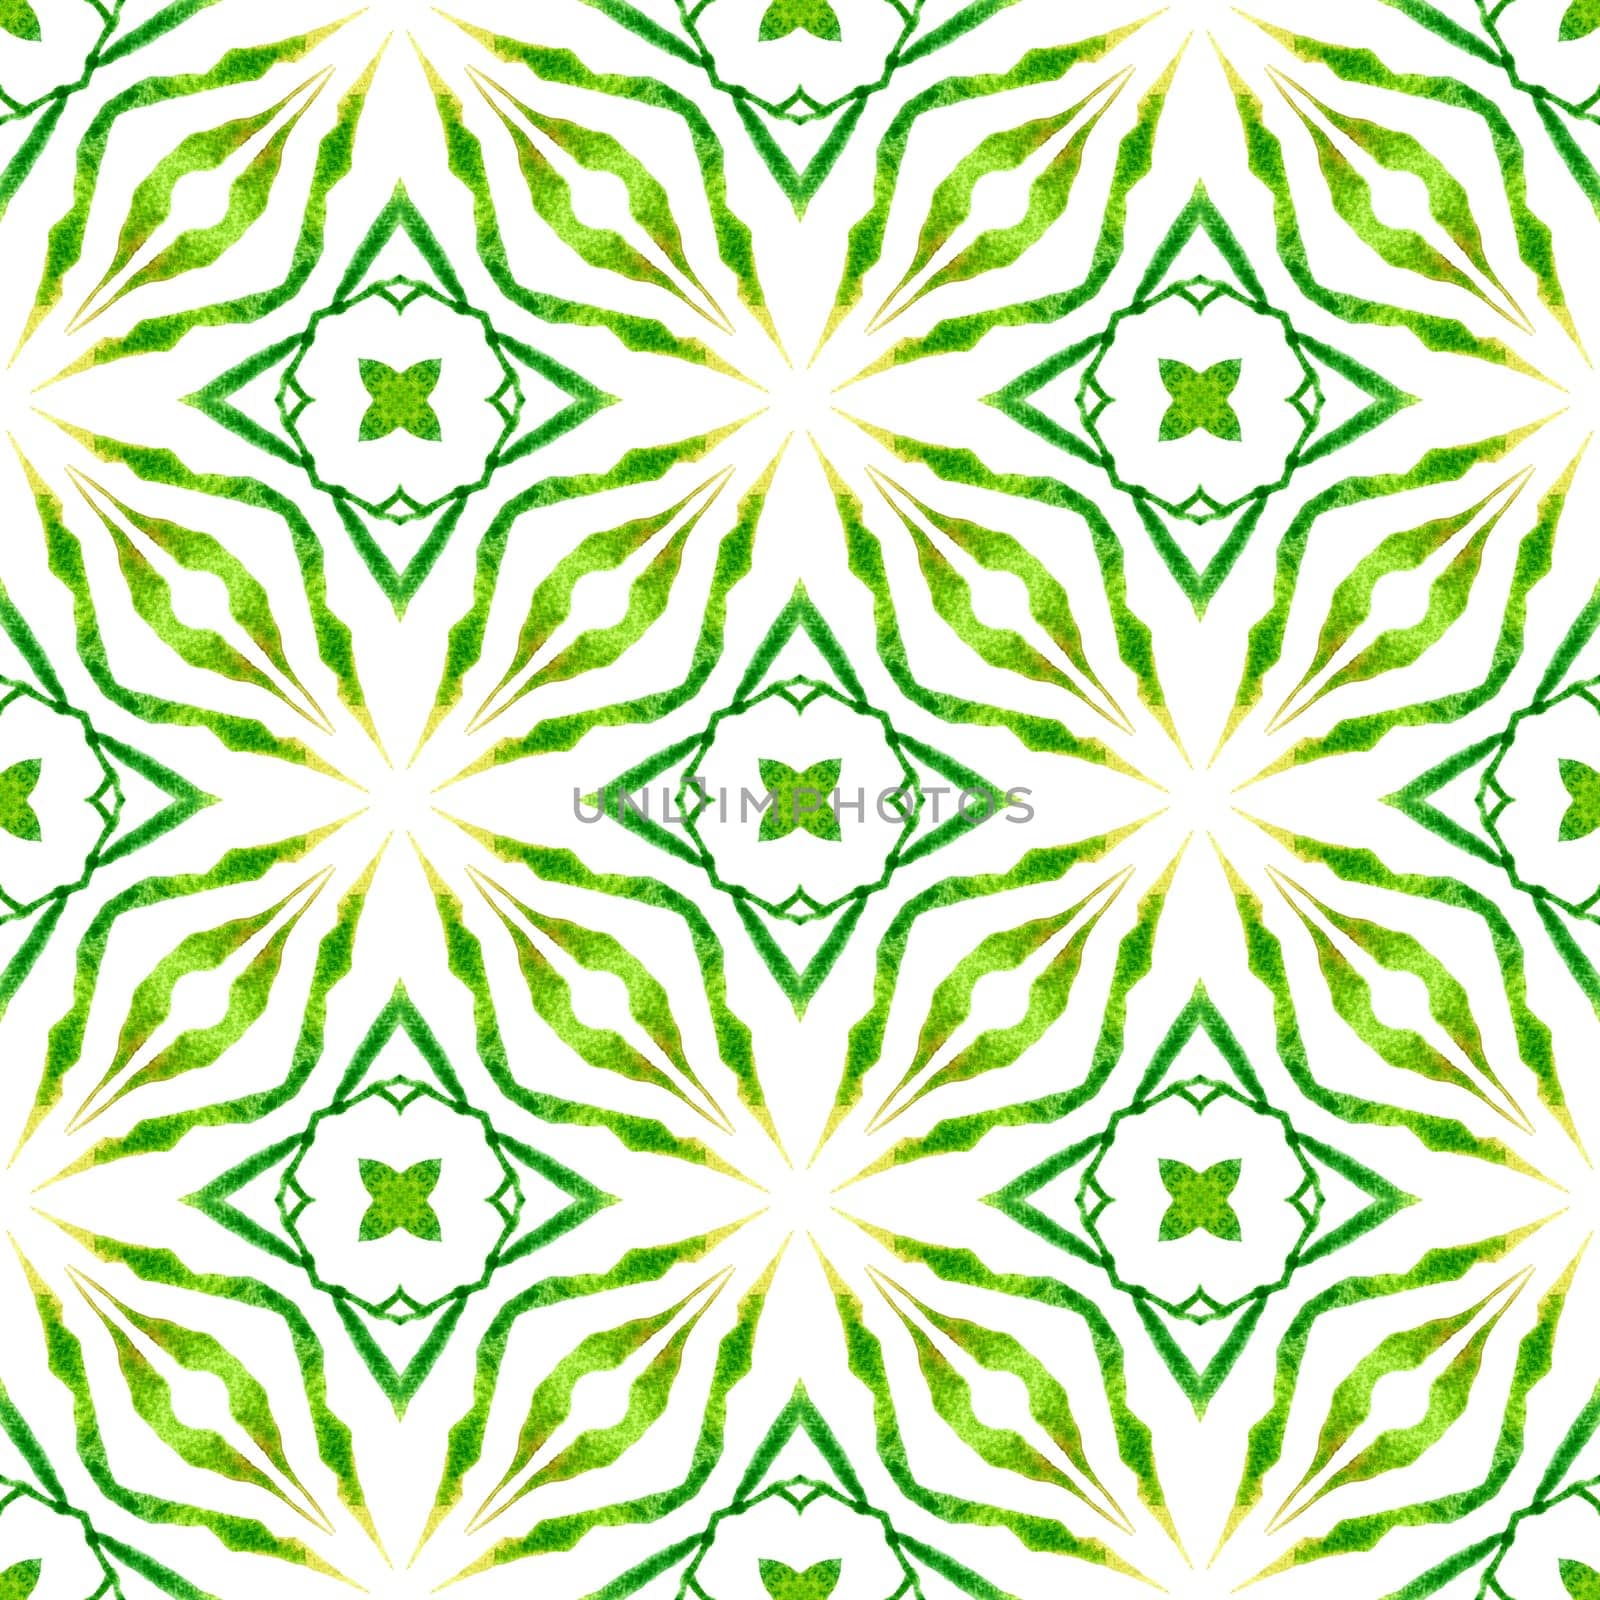 Textile ready overwhelming print, swimwear fabric, wallpaper, wrapping. Green ravishing boho chic summer design. Hand painted tiled watercolor border. Tiled watercolor background.